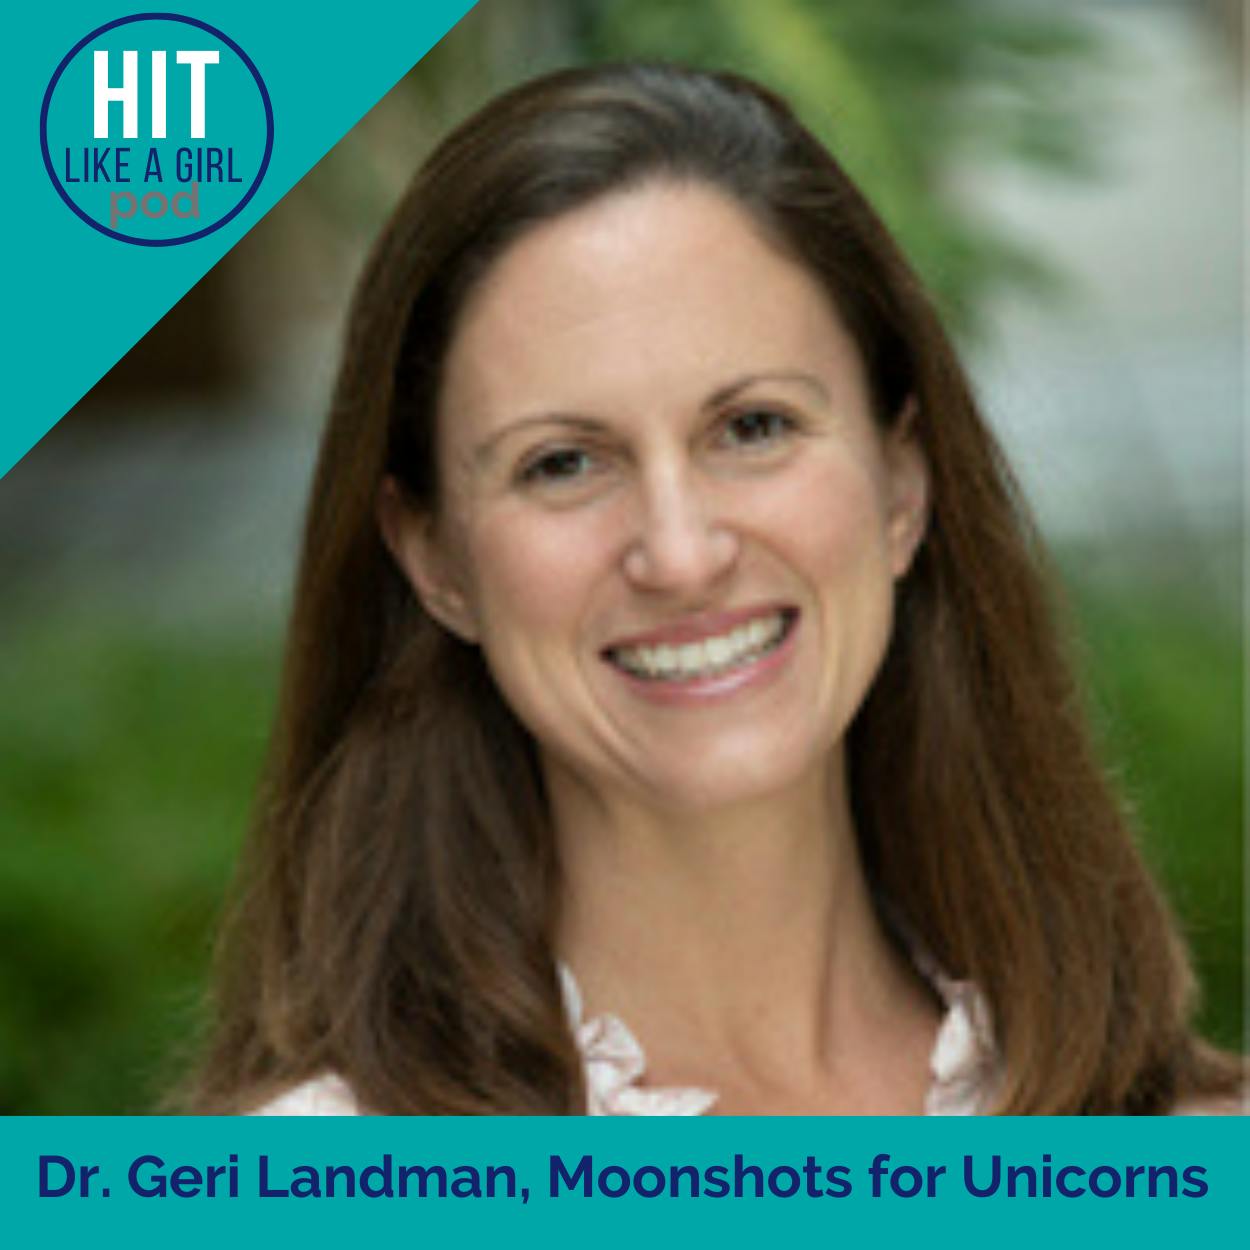 Geri Landman’s Moonshot Mission to Cure One Rare Disease at a Time